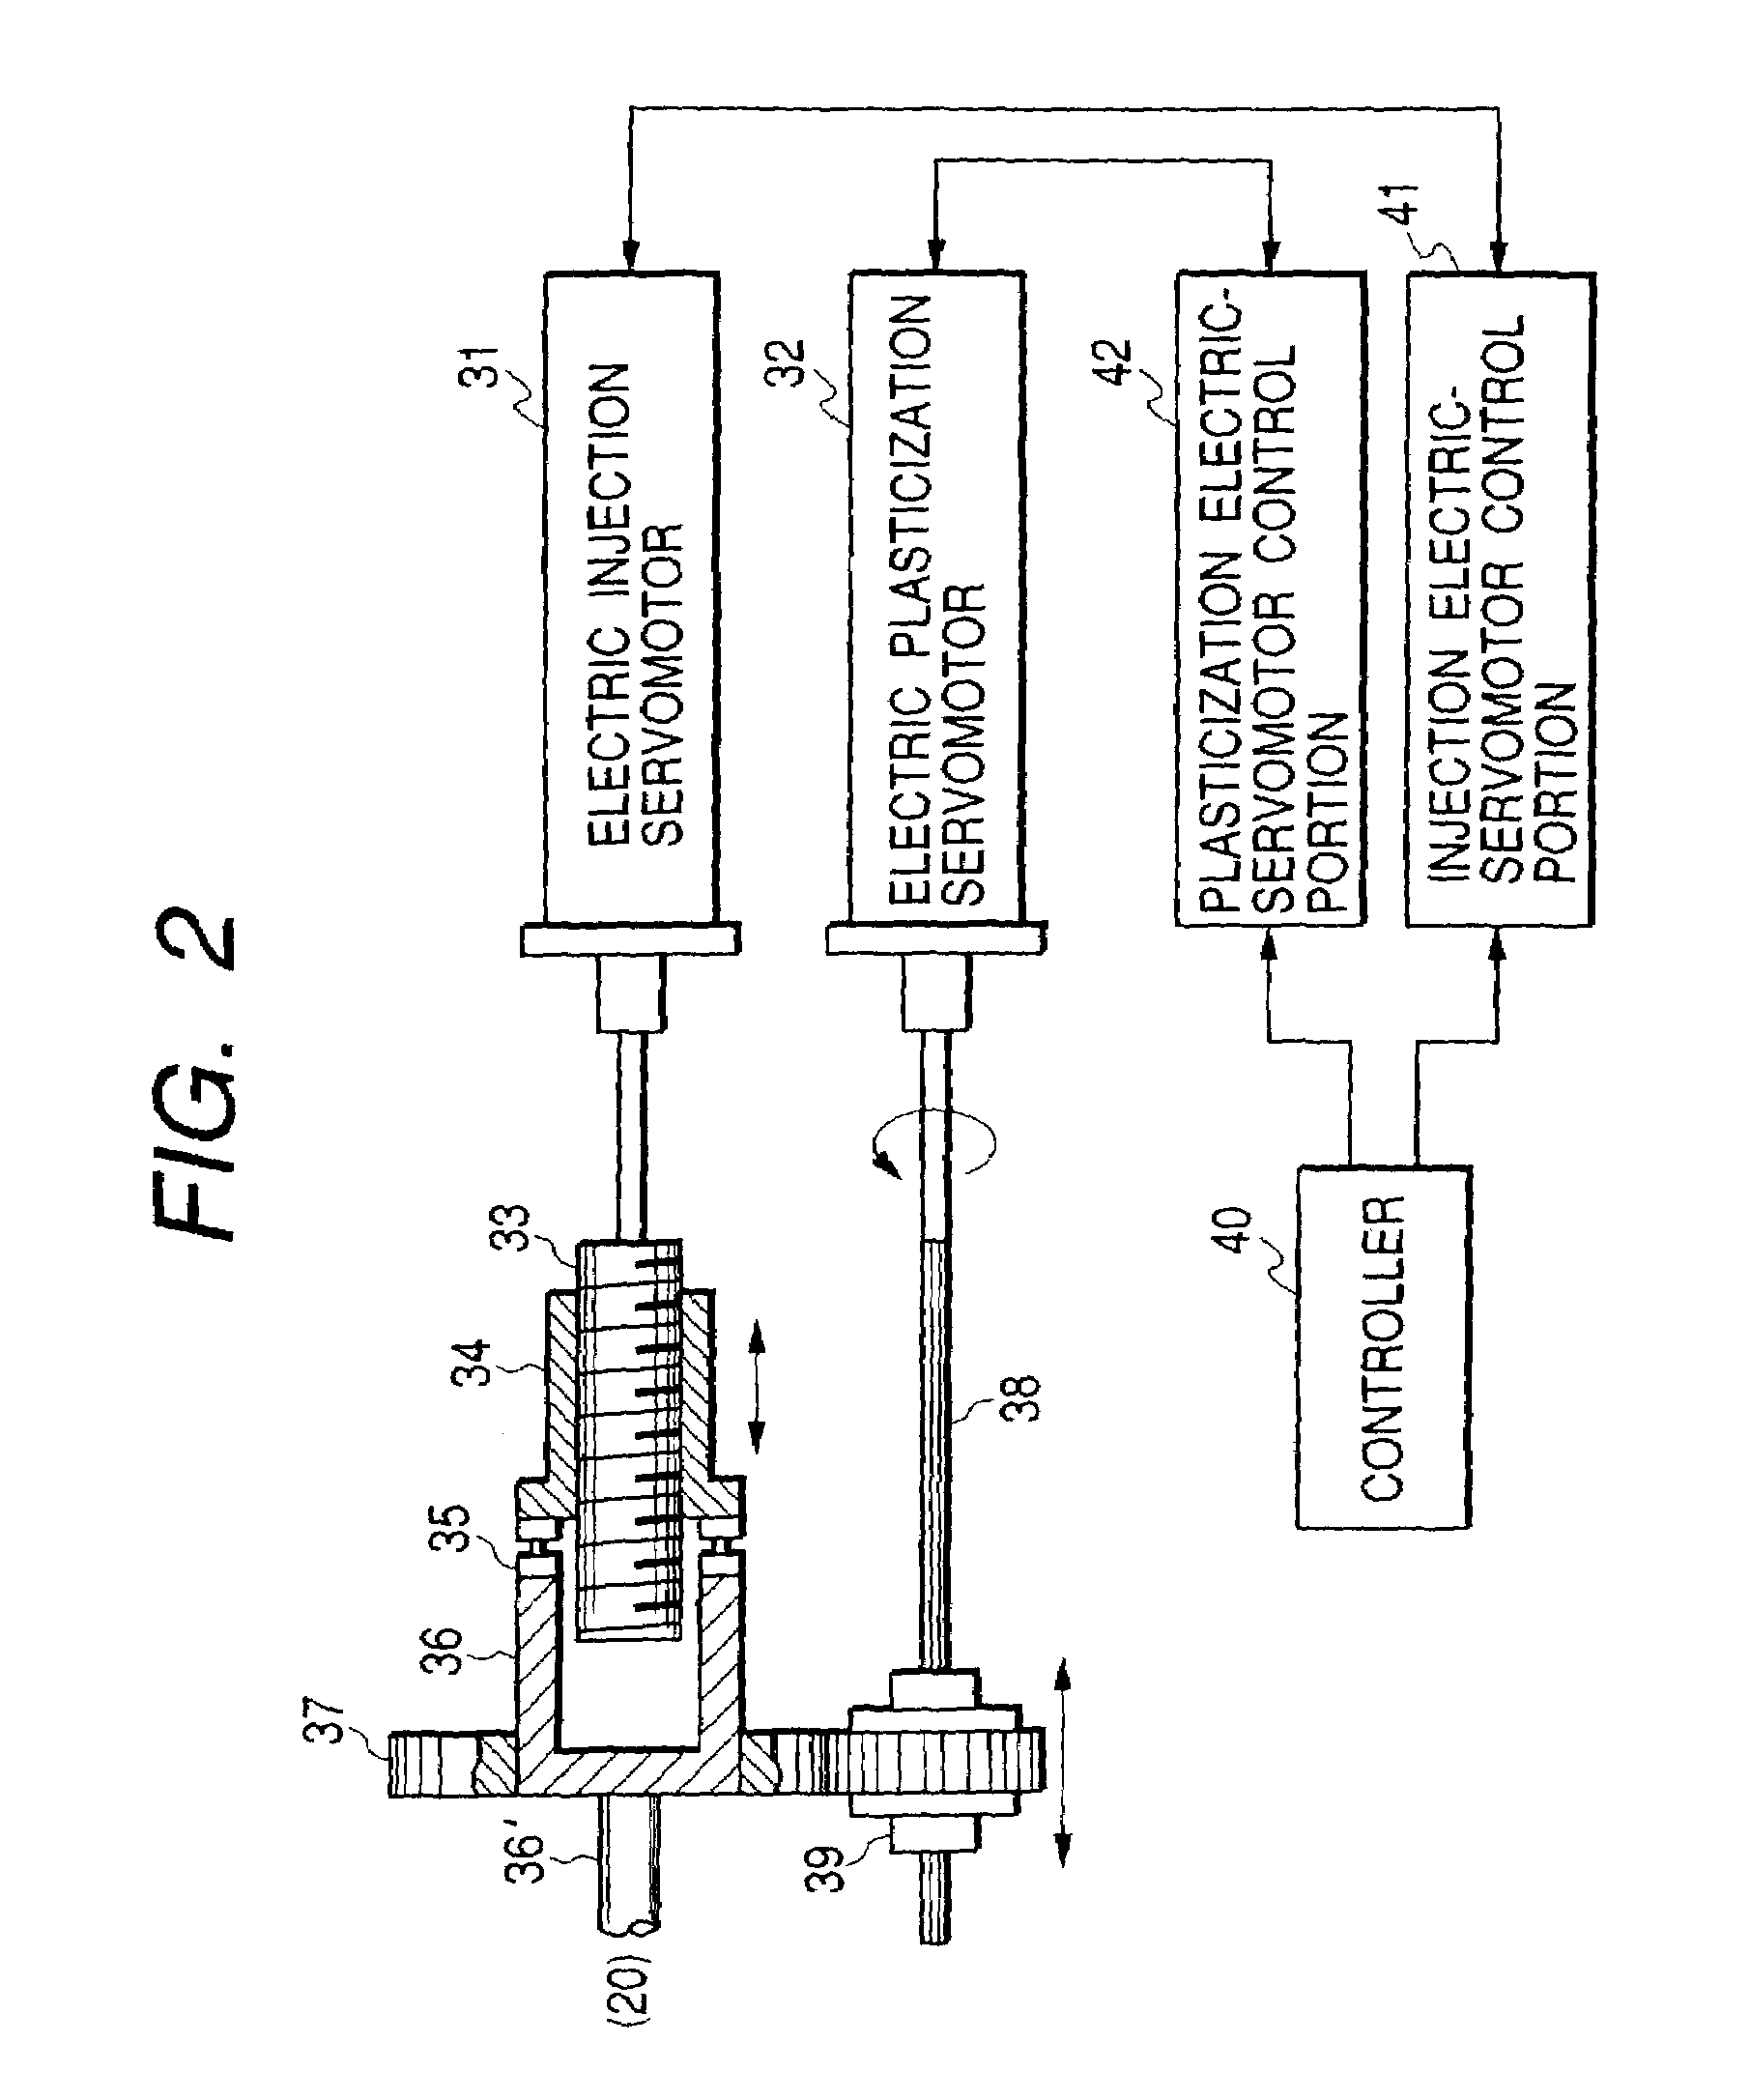 Method and apparatus for forming thermoplastic resin foam